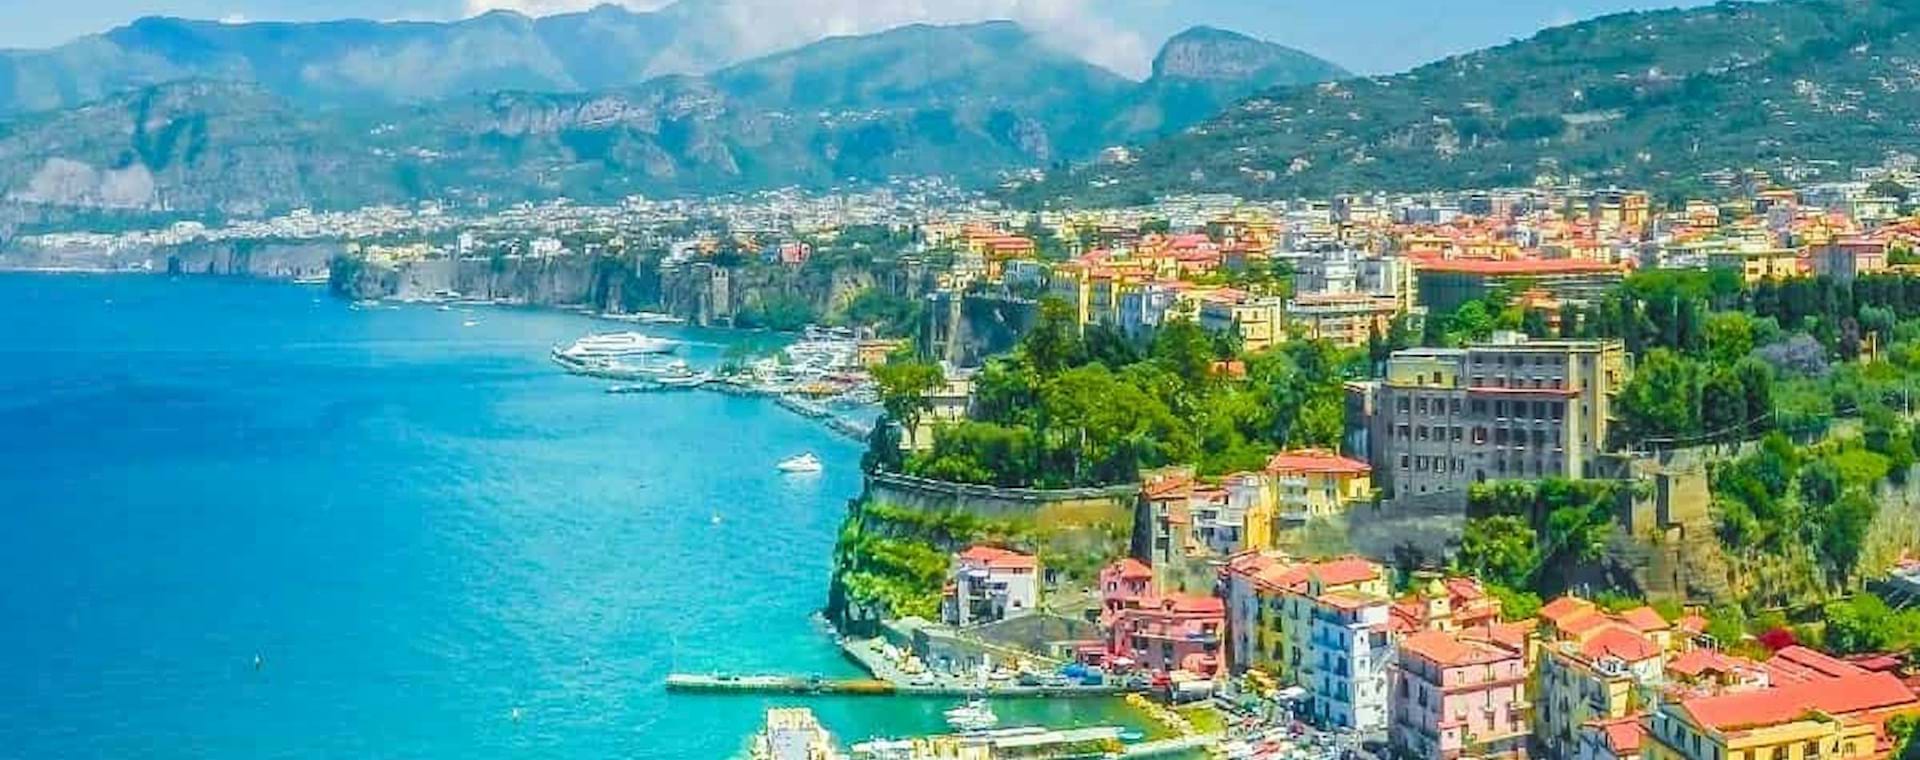 Stunning view of Sorrento on a sunny day